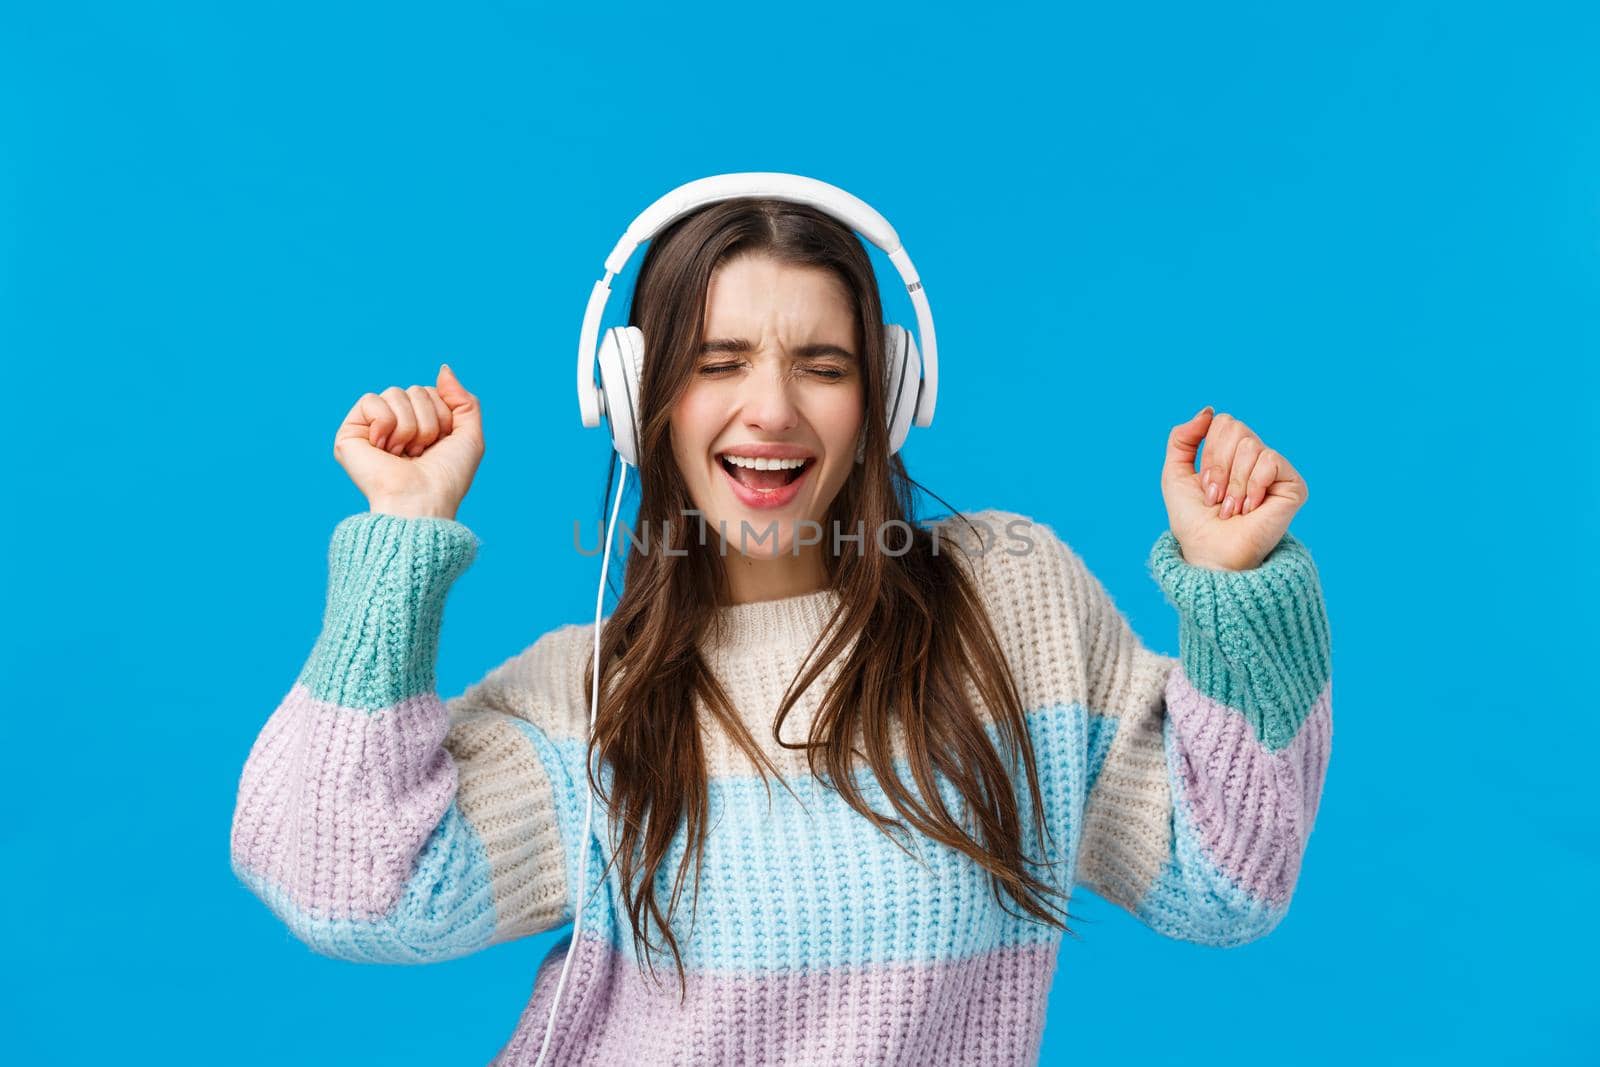 Rock n roll baby. Carefree emotive charismatic brunette woman enjoying listening music in new gift headphones, dancing raising hands up, close eyes and singing along favorite song, blue background.